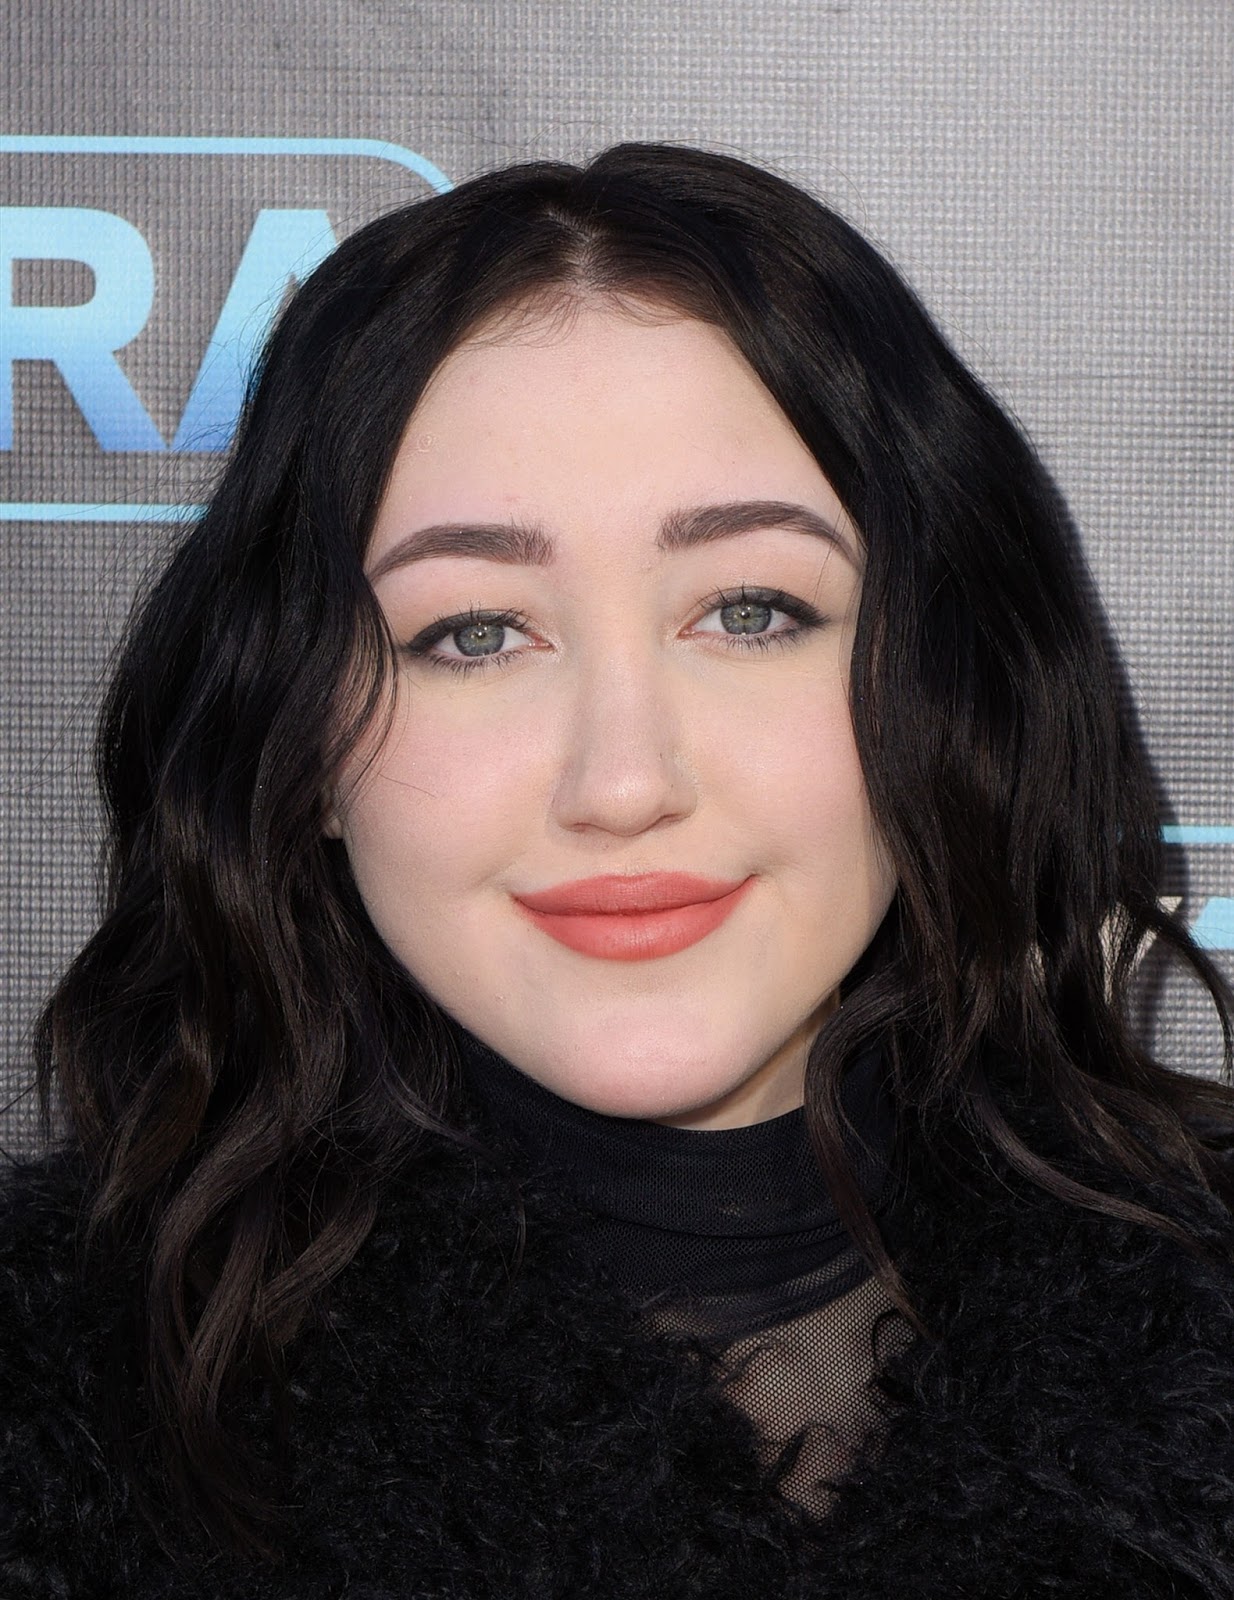 Tune Of The Day: Noah Cyrus - Stay Together